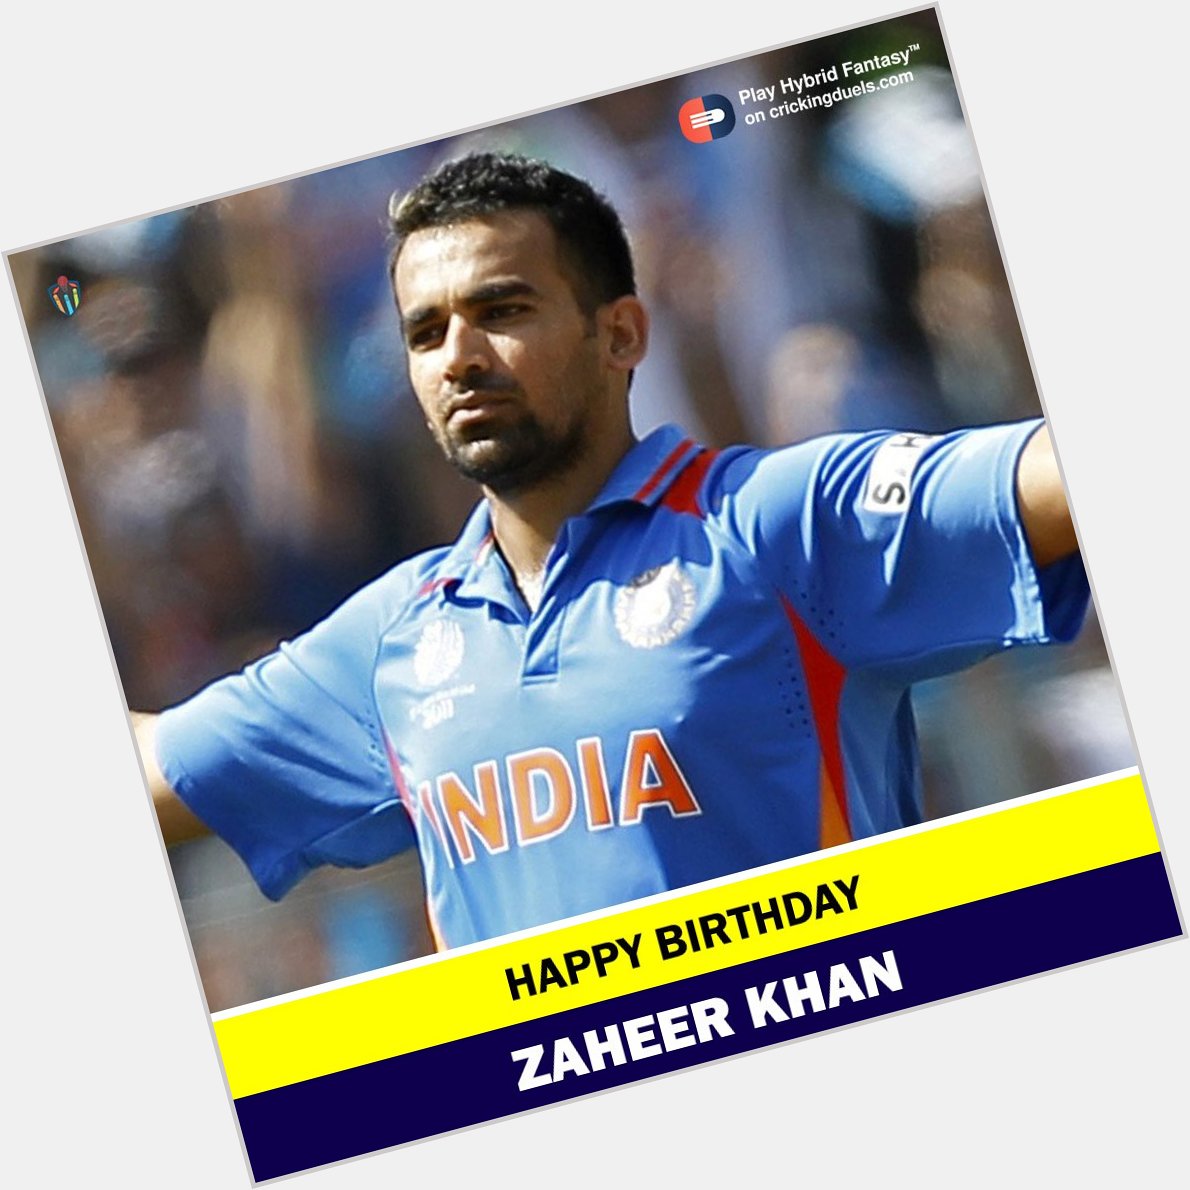 Happy Birthday, Zaheer Khan. The Indian cricketer turns 39 today. 